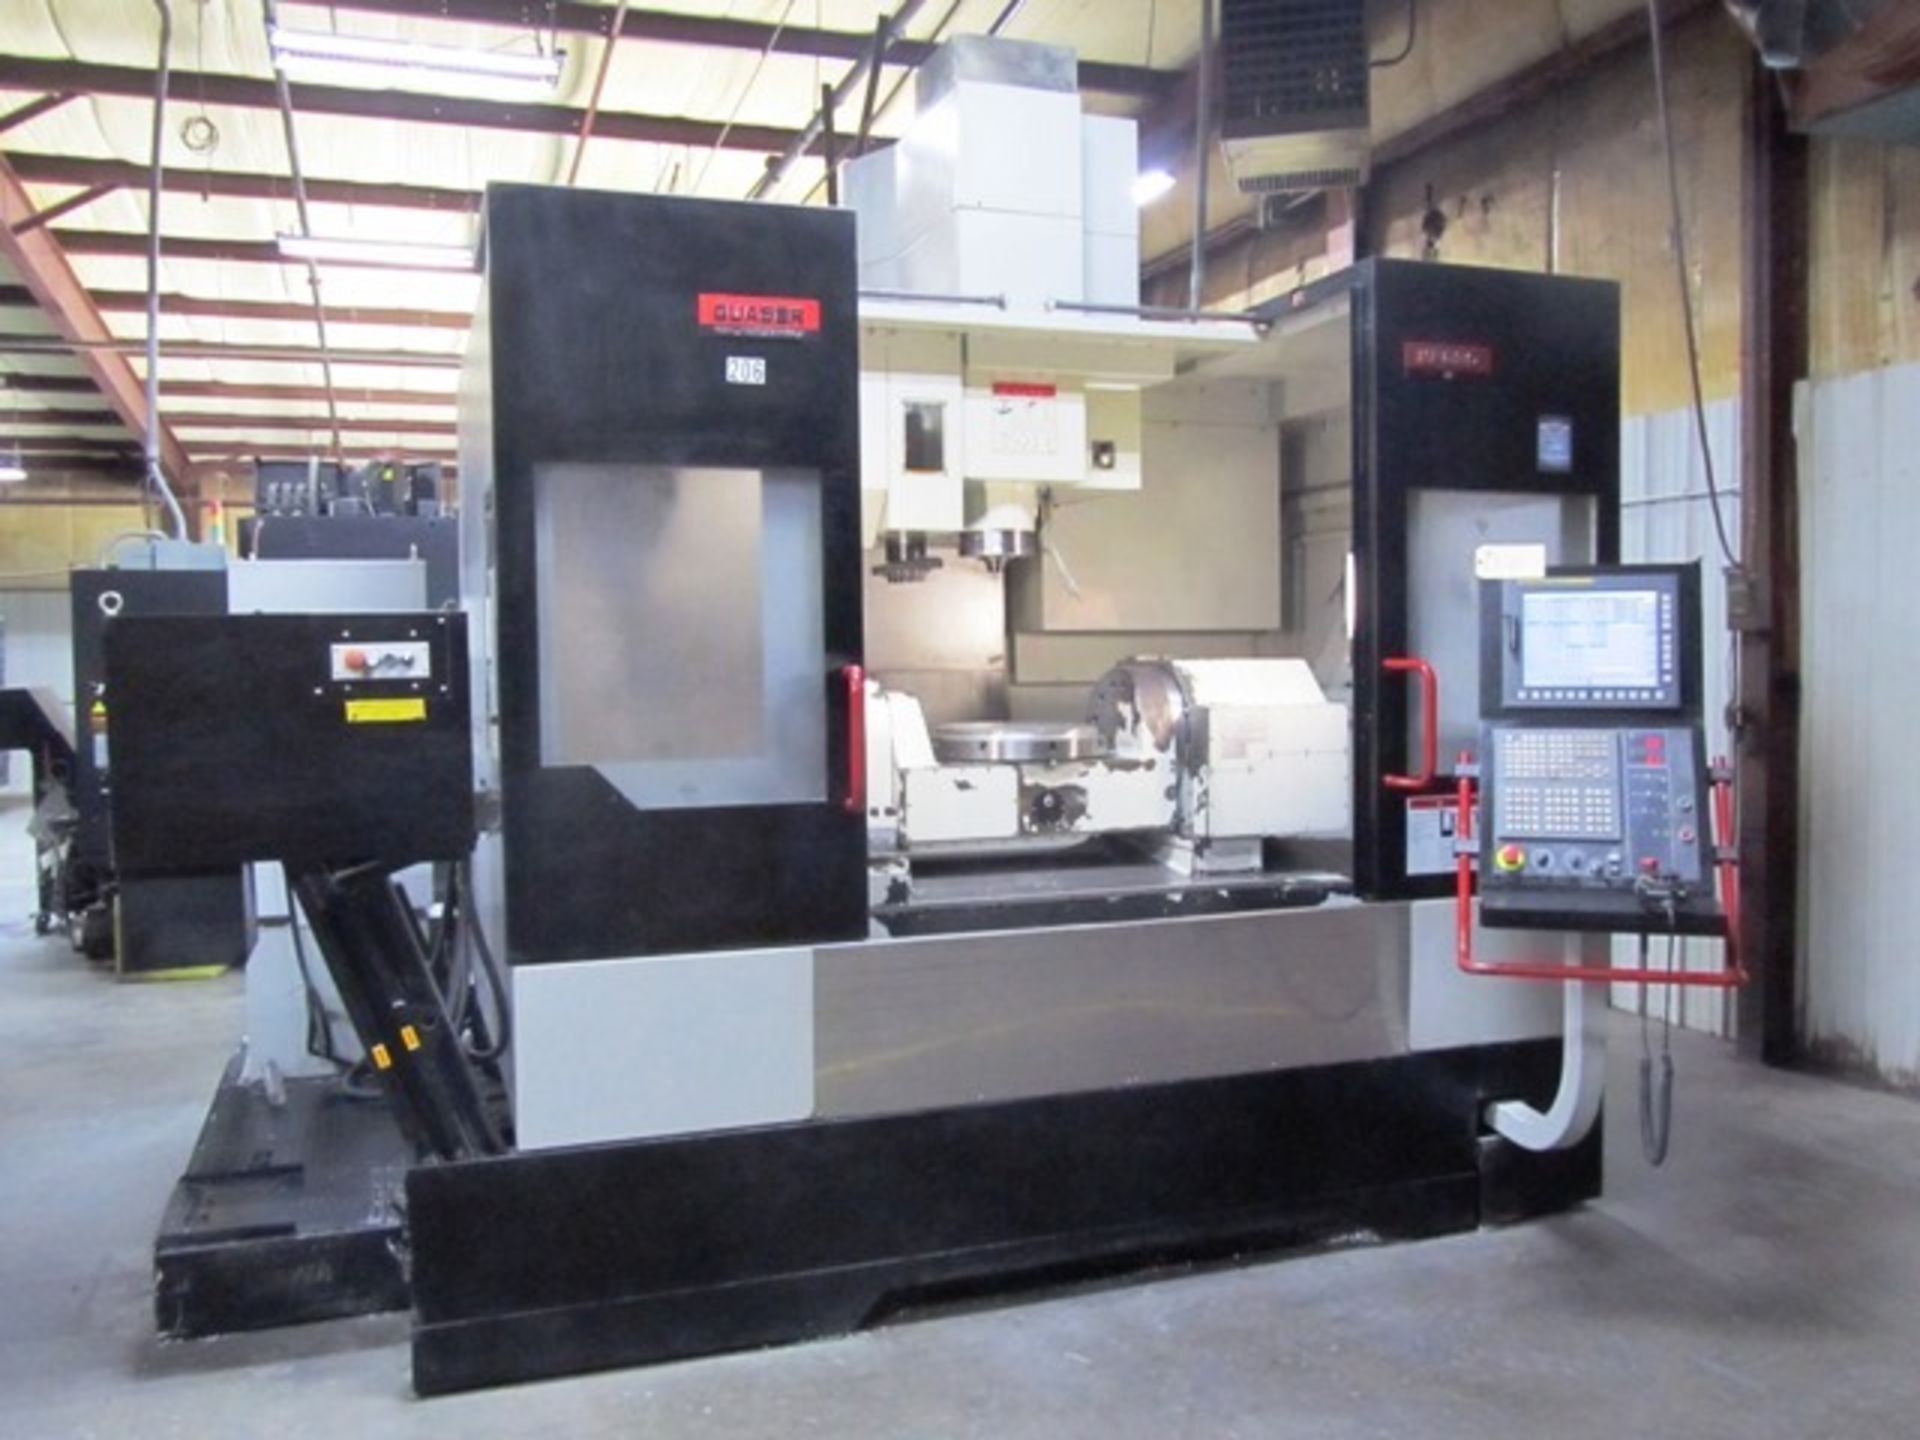 Quaser MF630U/15C 5-Axis CNC Vertical Machining Center with 19'' Diameter Rotary Trunnion Work - Image 3 of 5